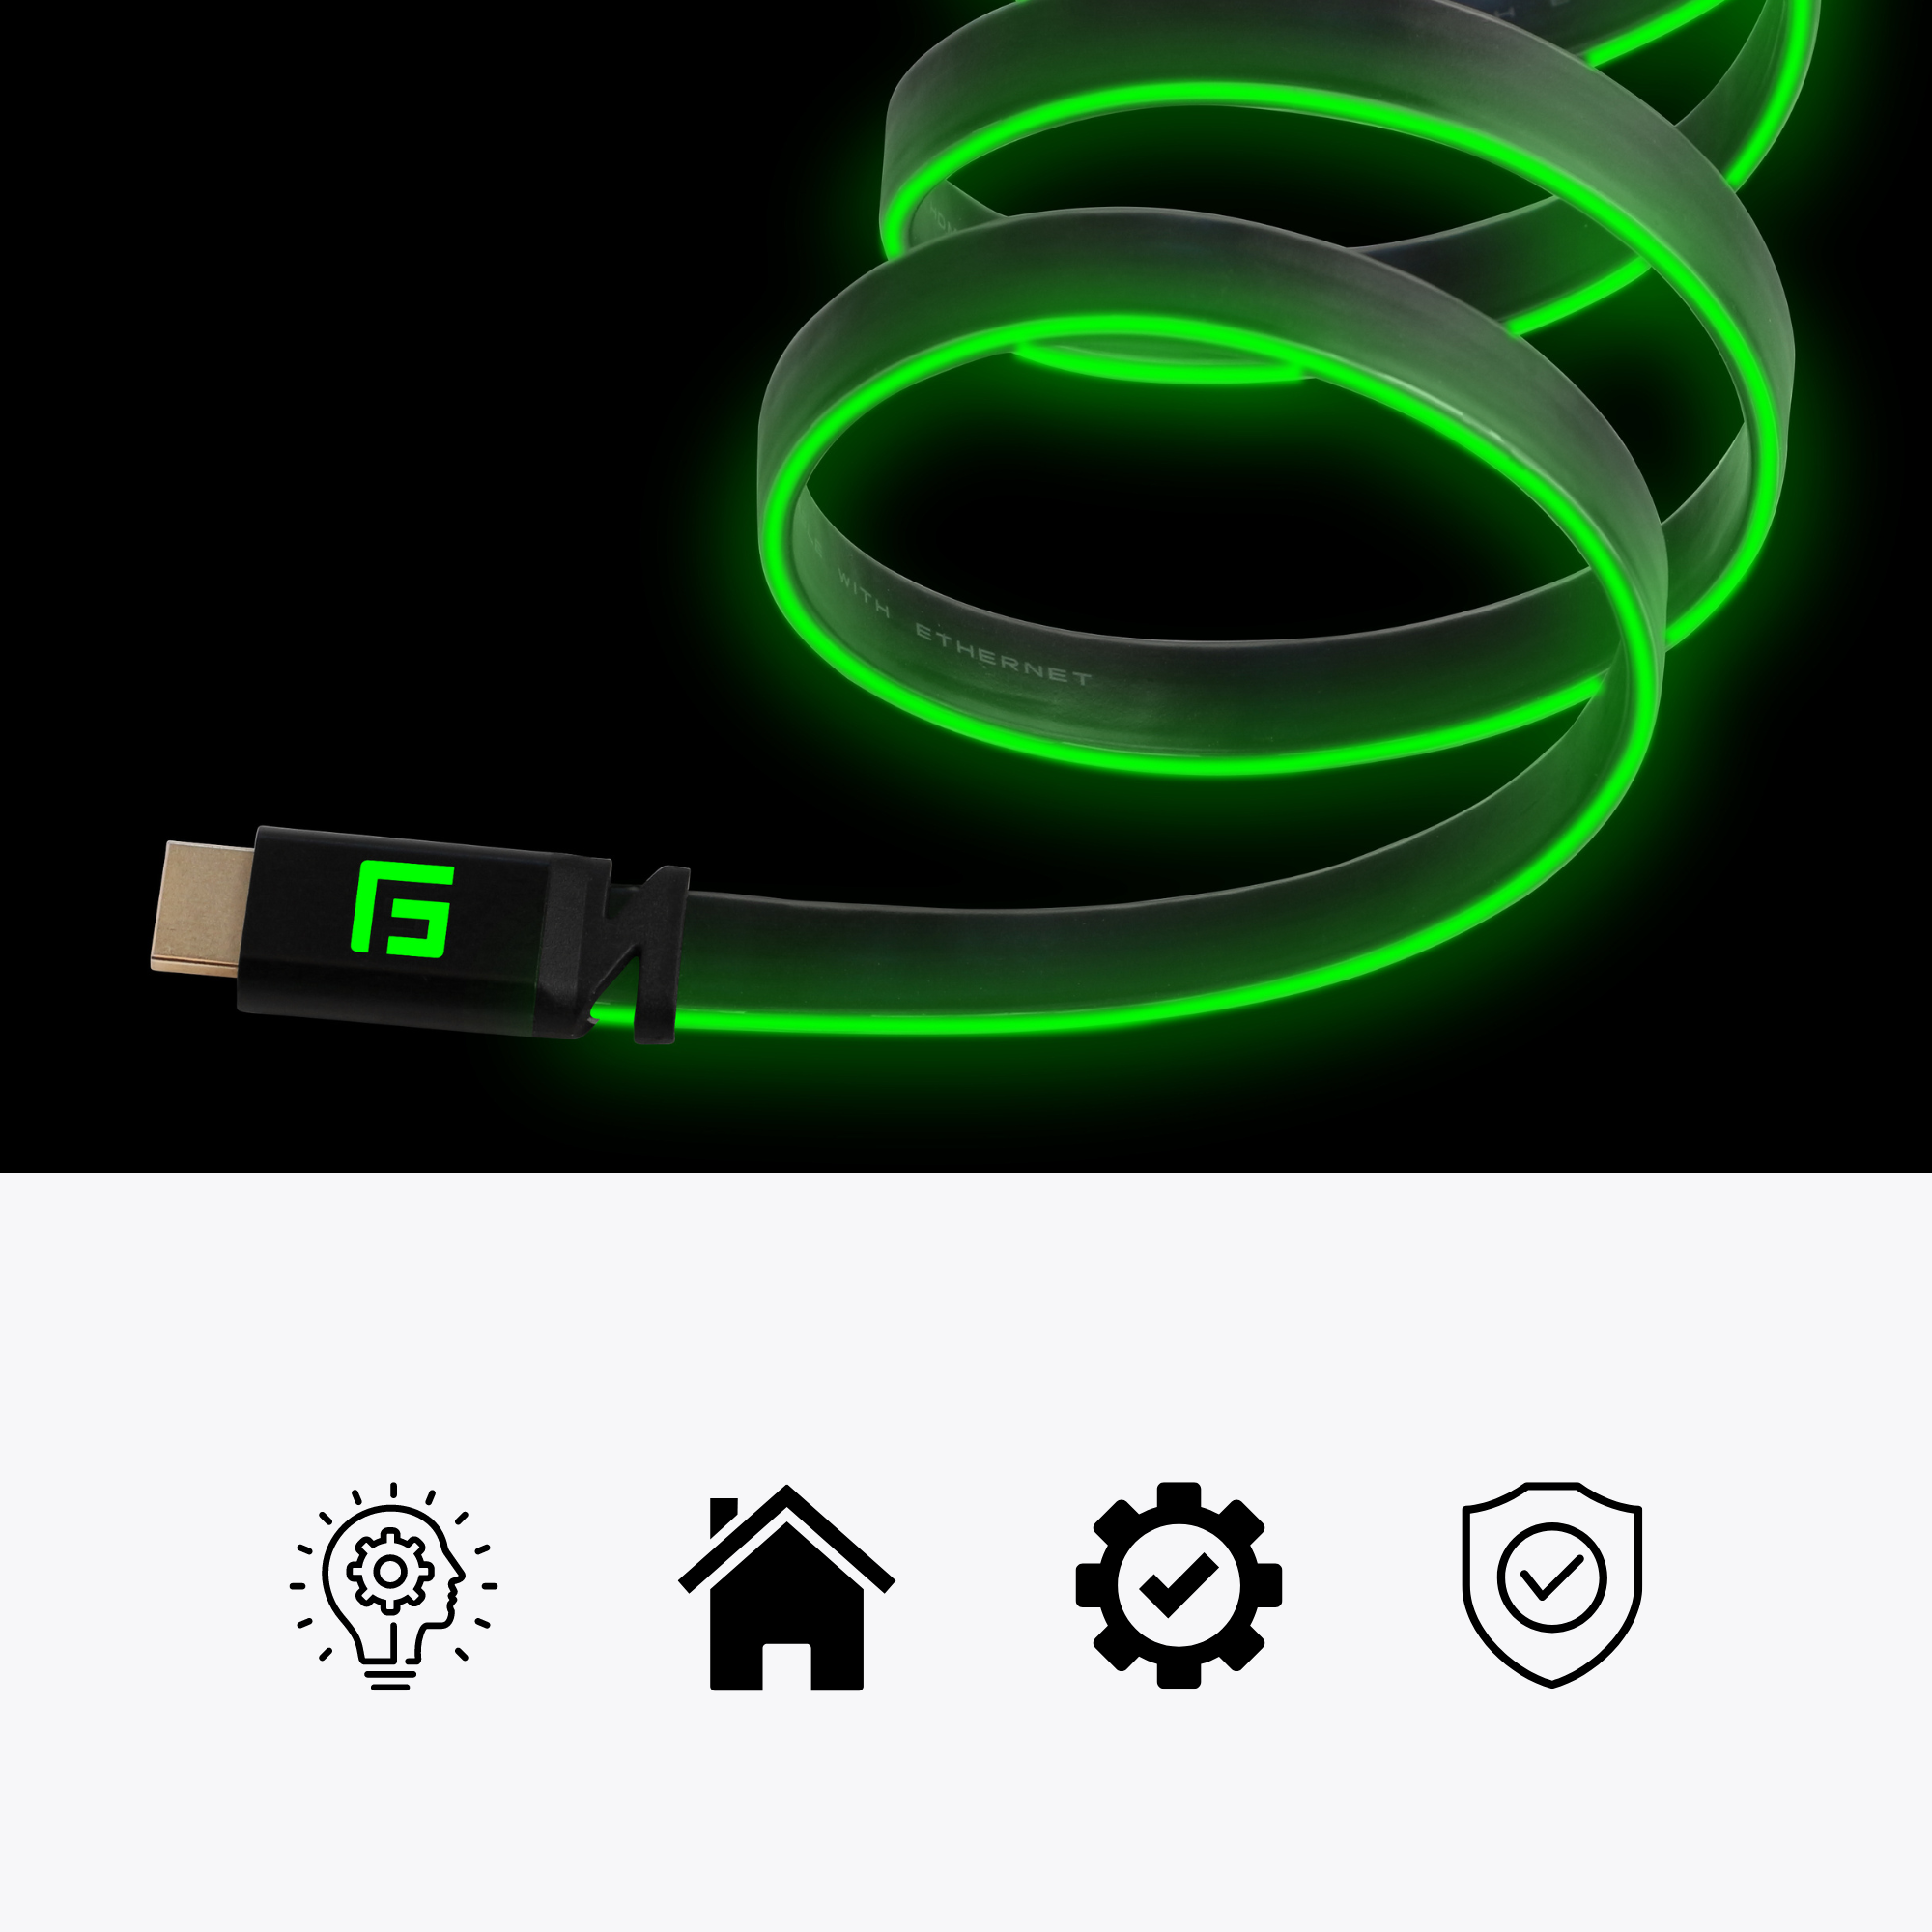 1,5M/5ft Green LED HDMI Cable, V.2.1 | High-Speed | 8K/60Hz